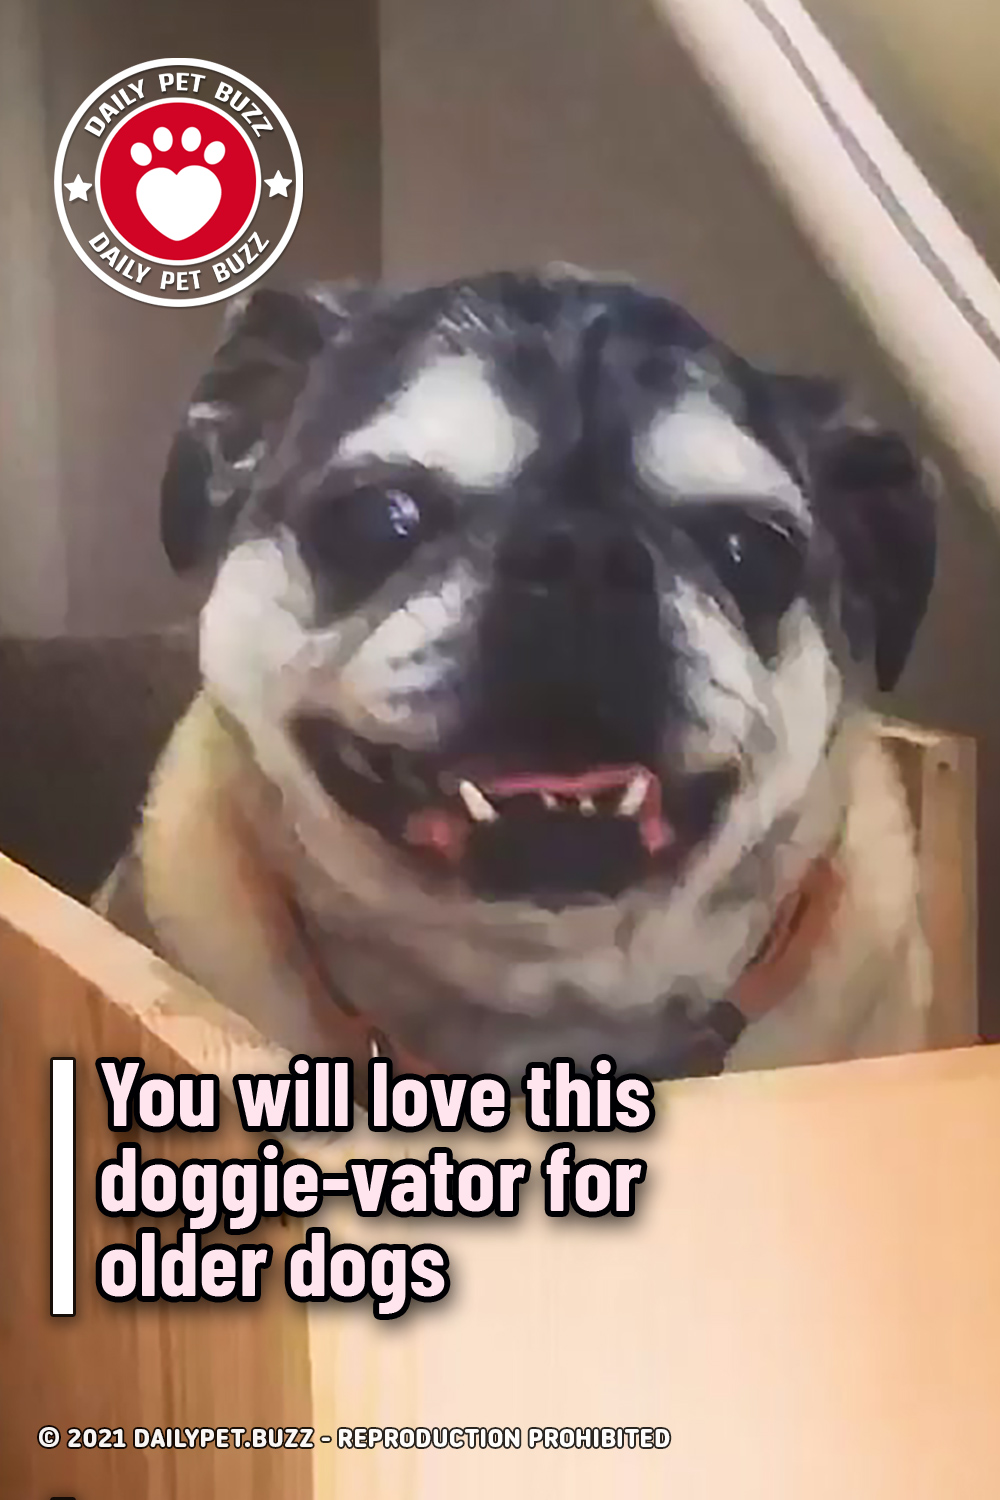 You will love this doggie-vator for older dogs